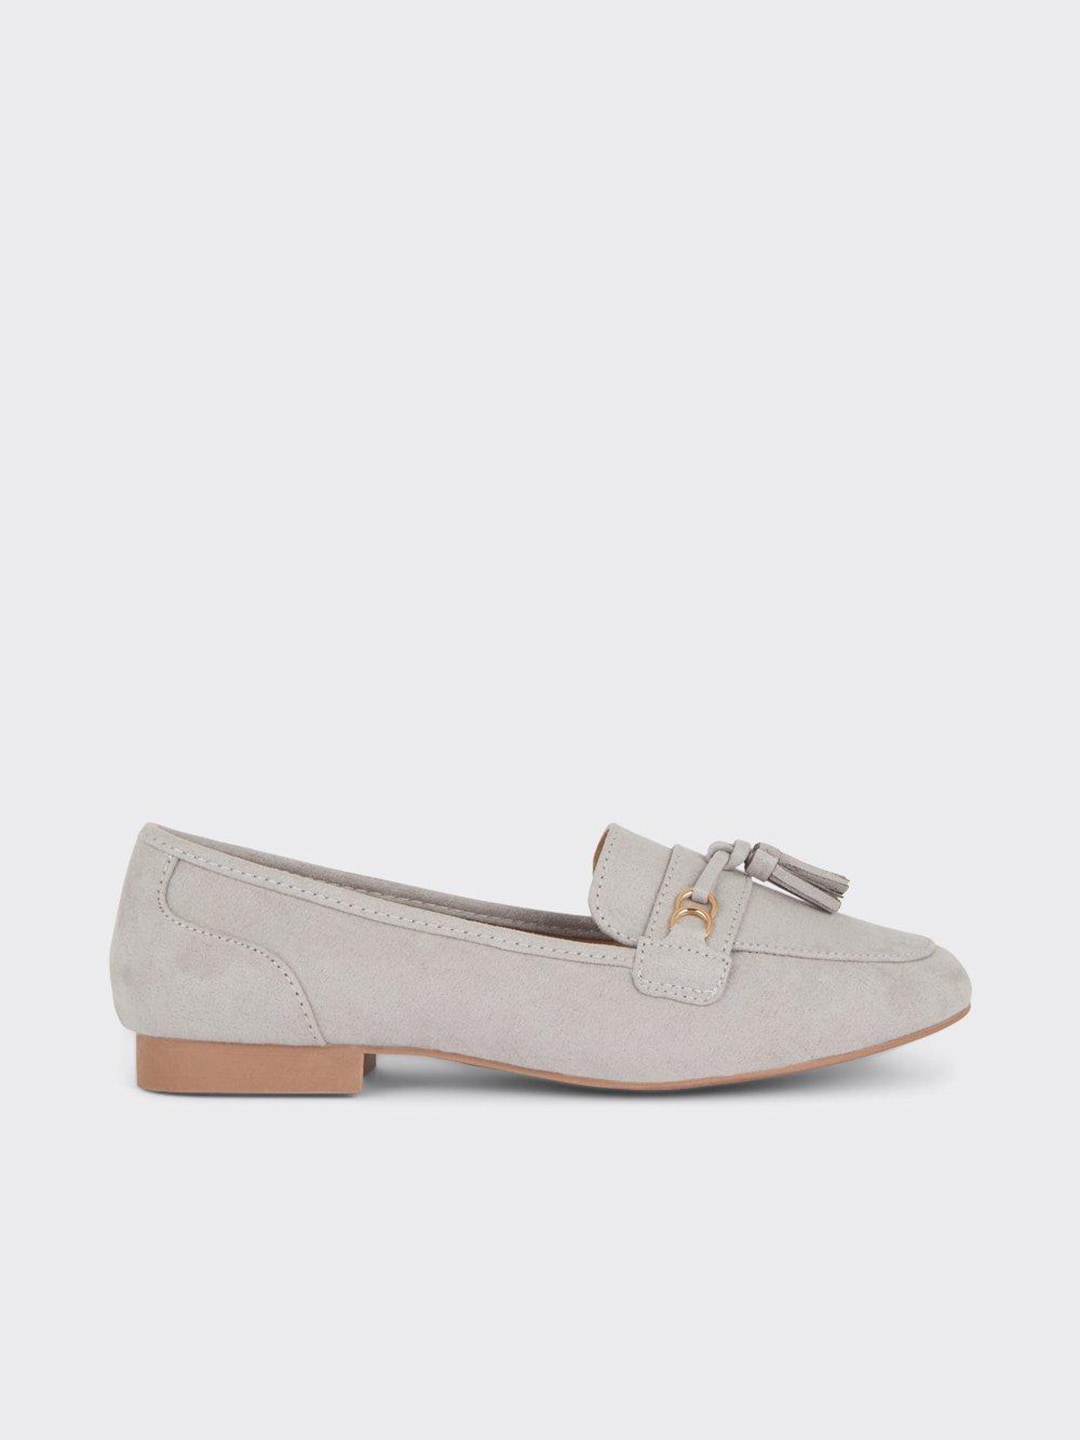 DOROTHY PERKINS Women Grey Leather Loafers Price in India